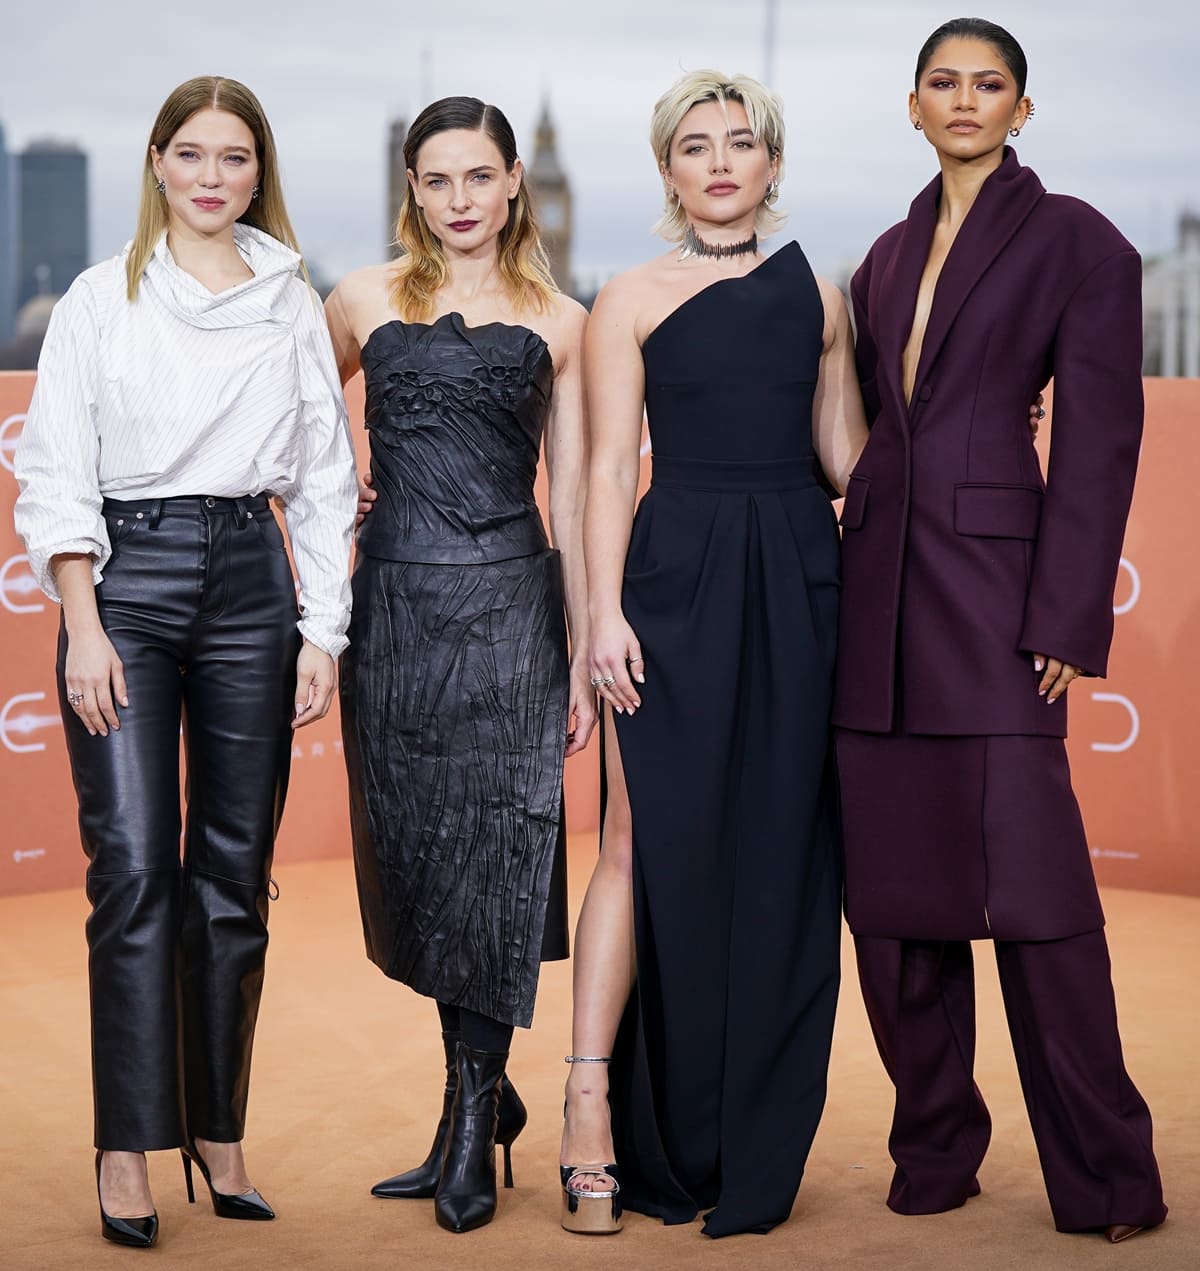 Zendaya stands tall among 'Dune: Part Two' co-stars Lea Seydoux, Rebecca Ferguson, and Florence Pugh at the London photocall, showcasing the striking height difference